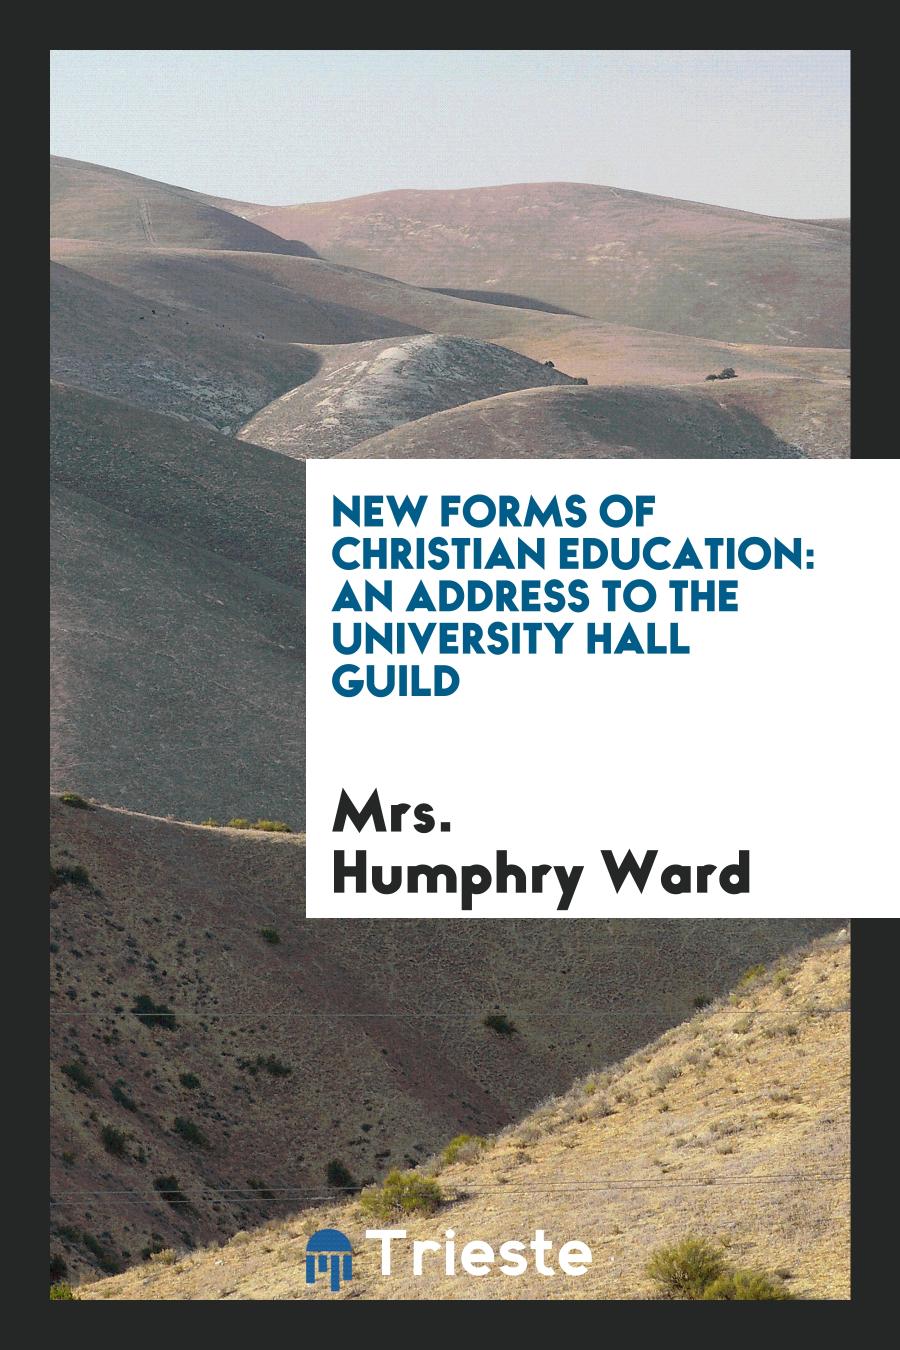 New Forms of Christian Education: An Address to the University Hall Guild